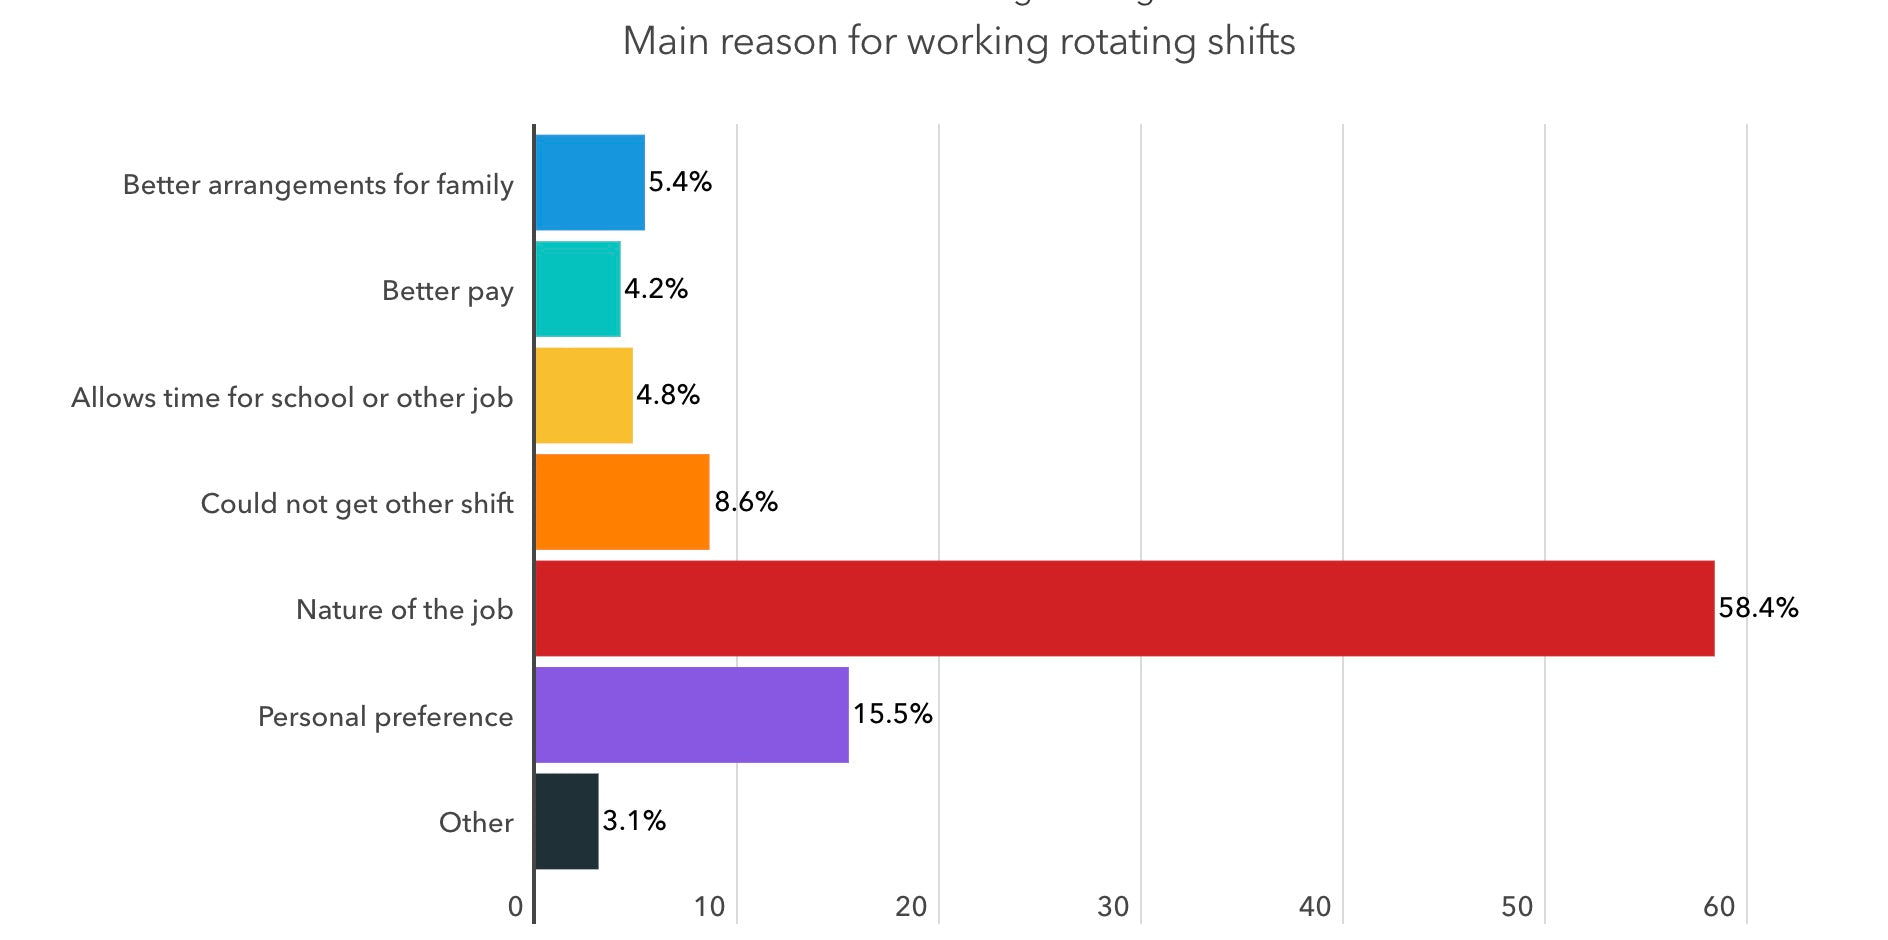 Reasons for working rotating shifts